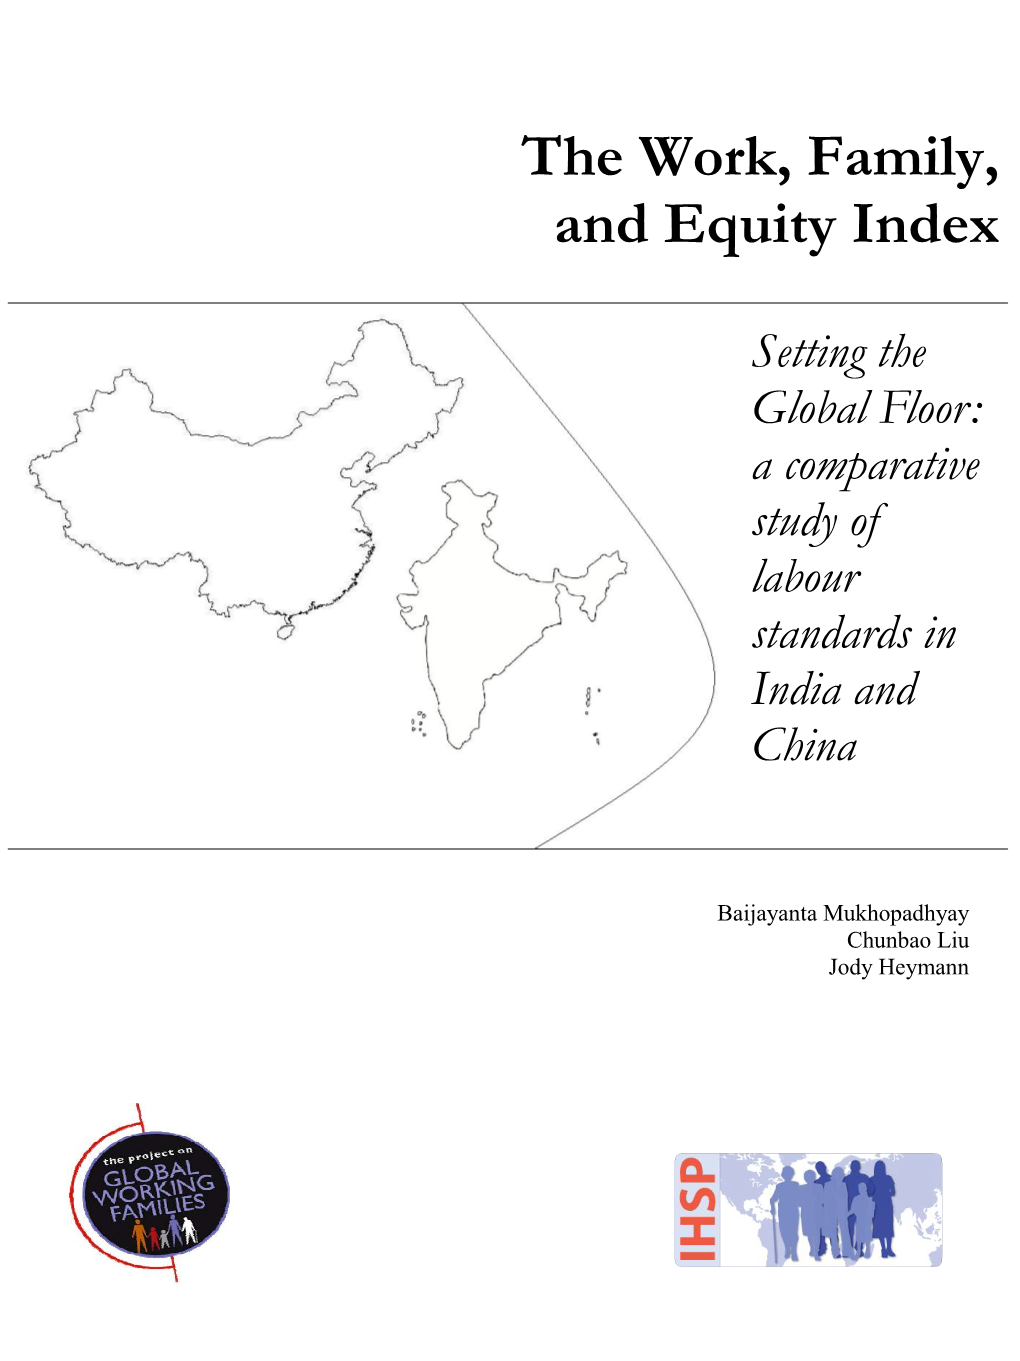 A Comparative Study of Labour Standards in India and China